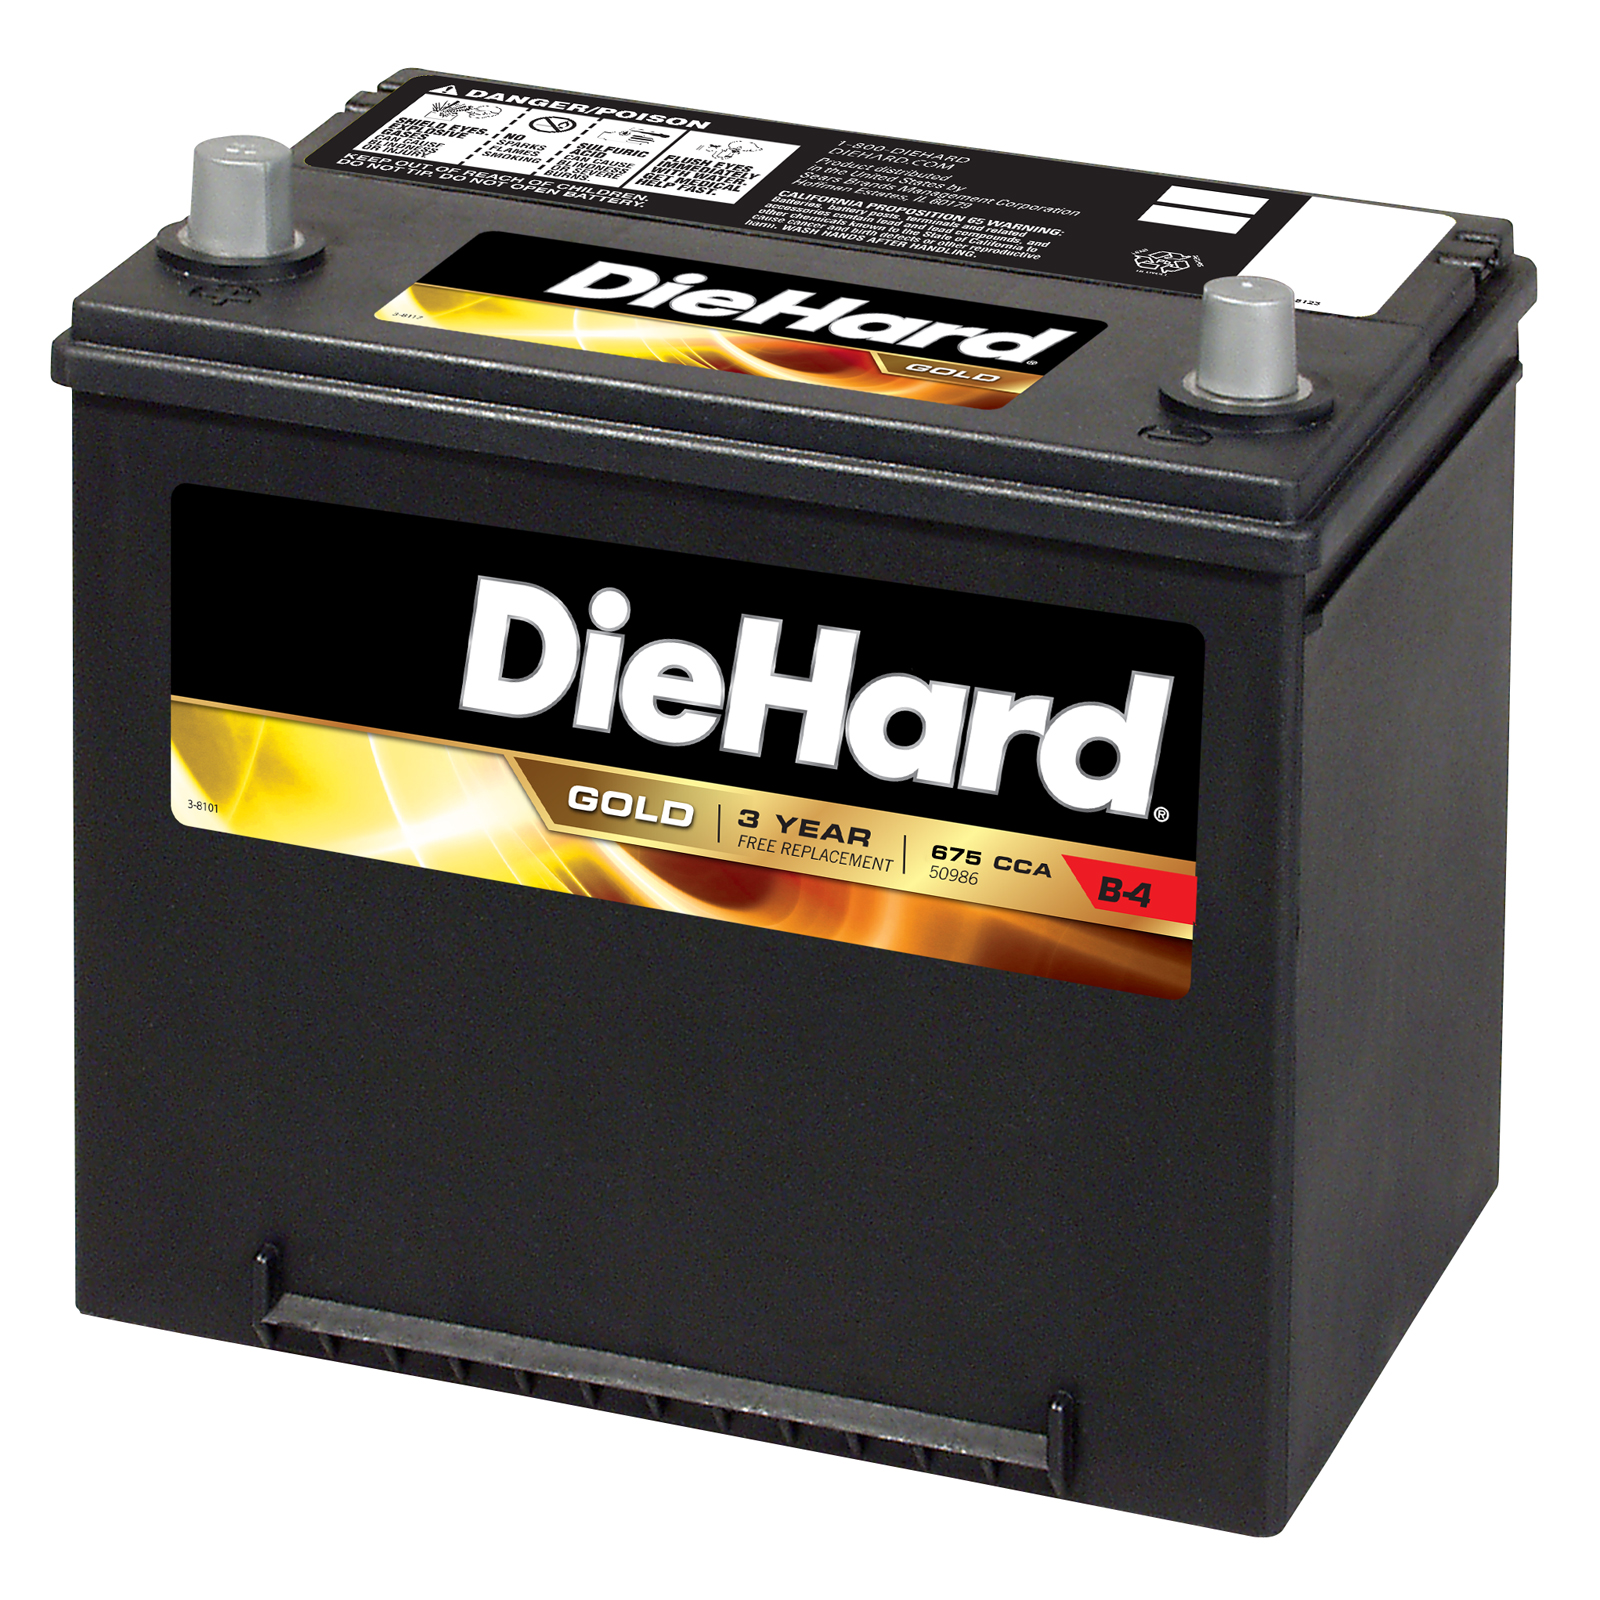 DieHard Gold Automotive Battery - Group Size EP-86 (Price with Exchange)